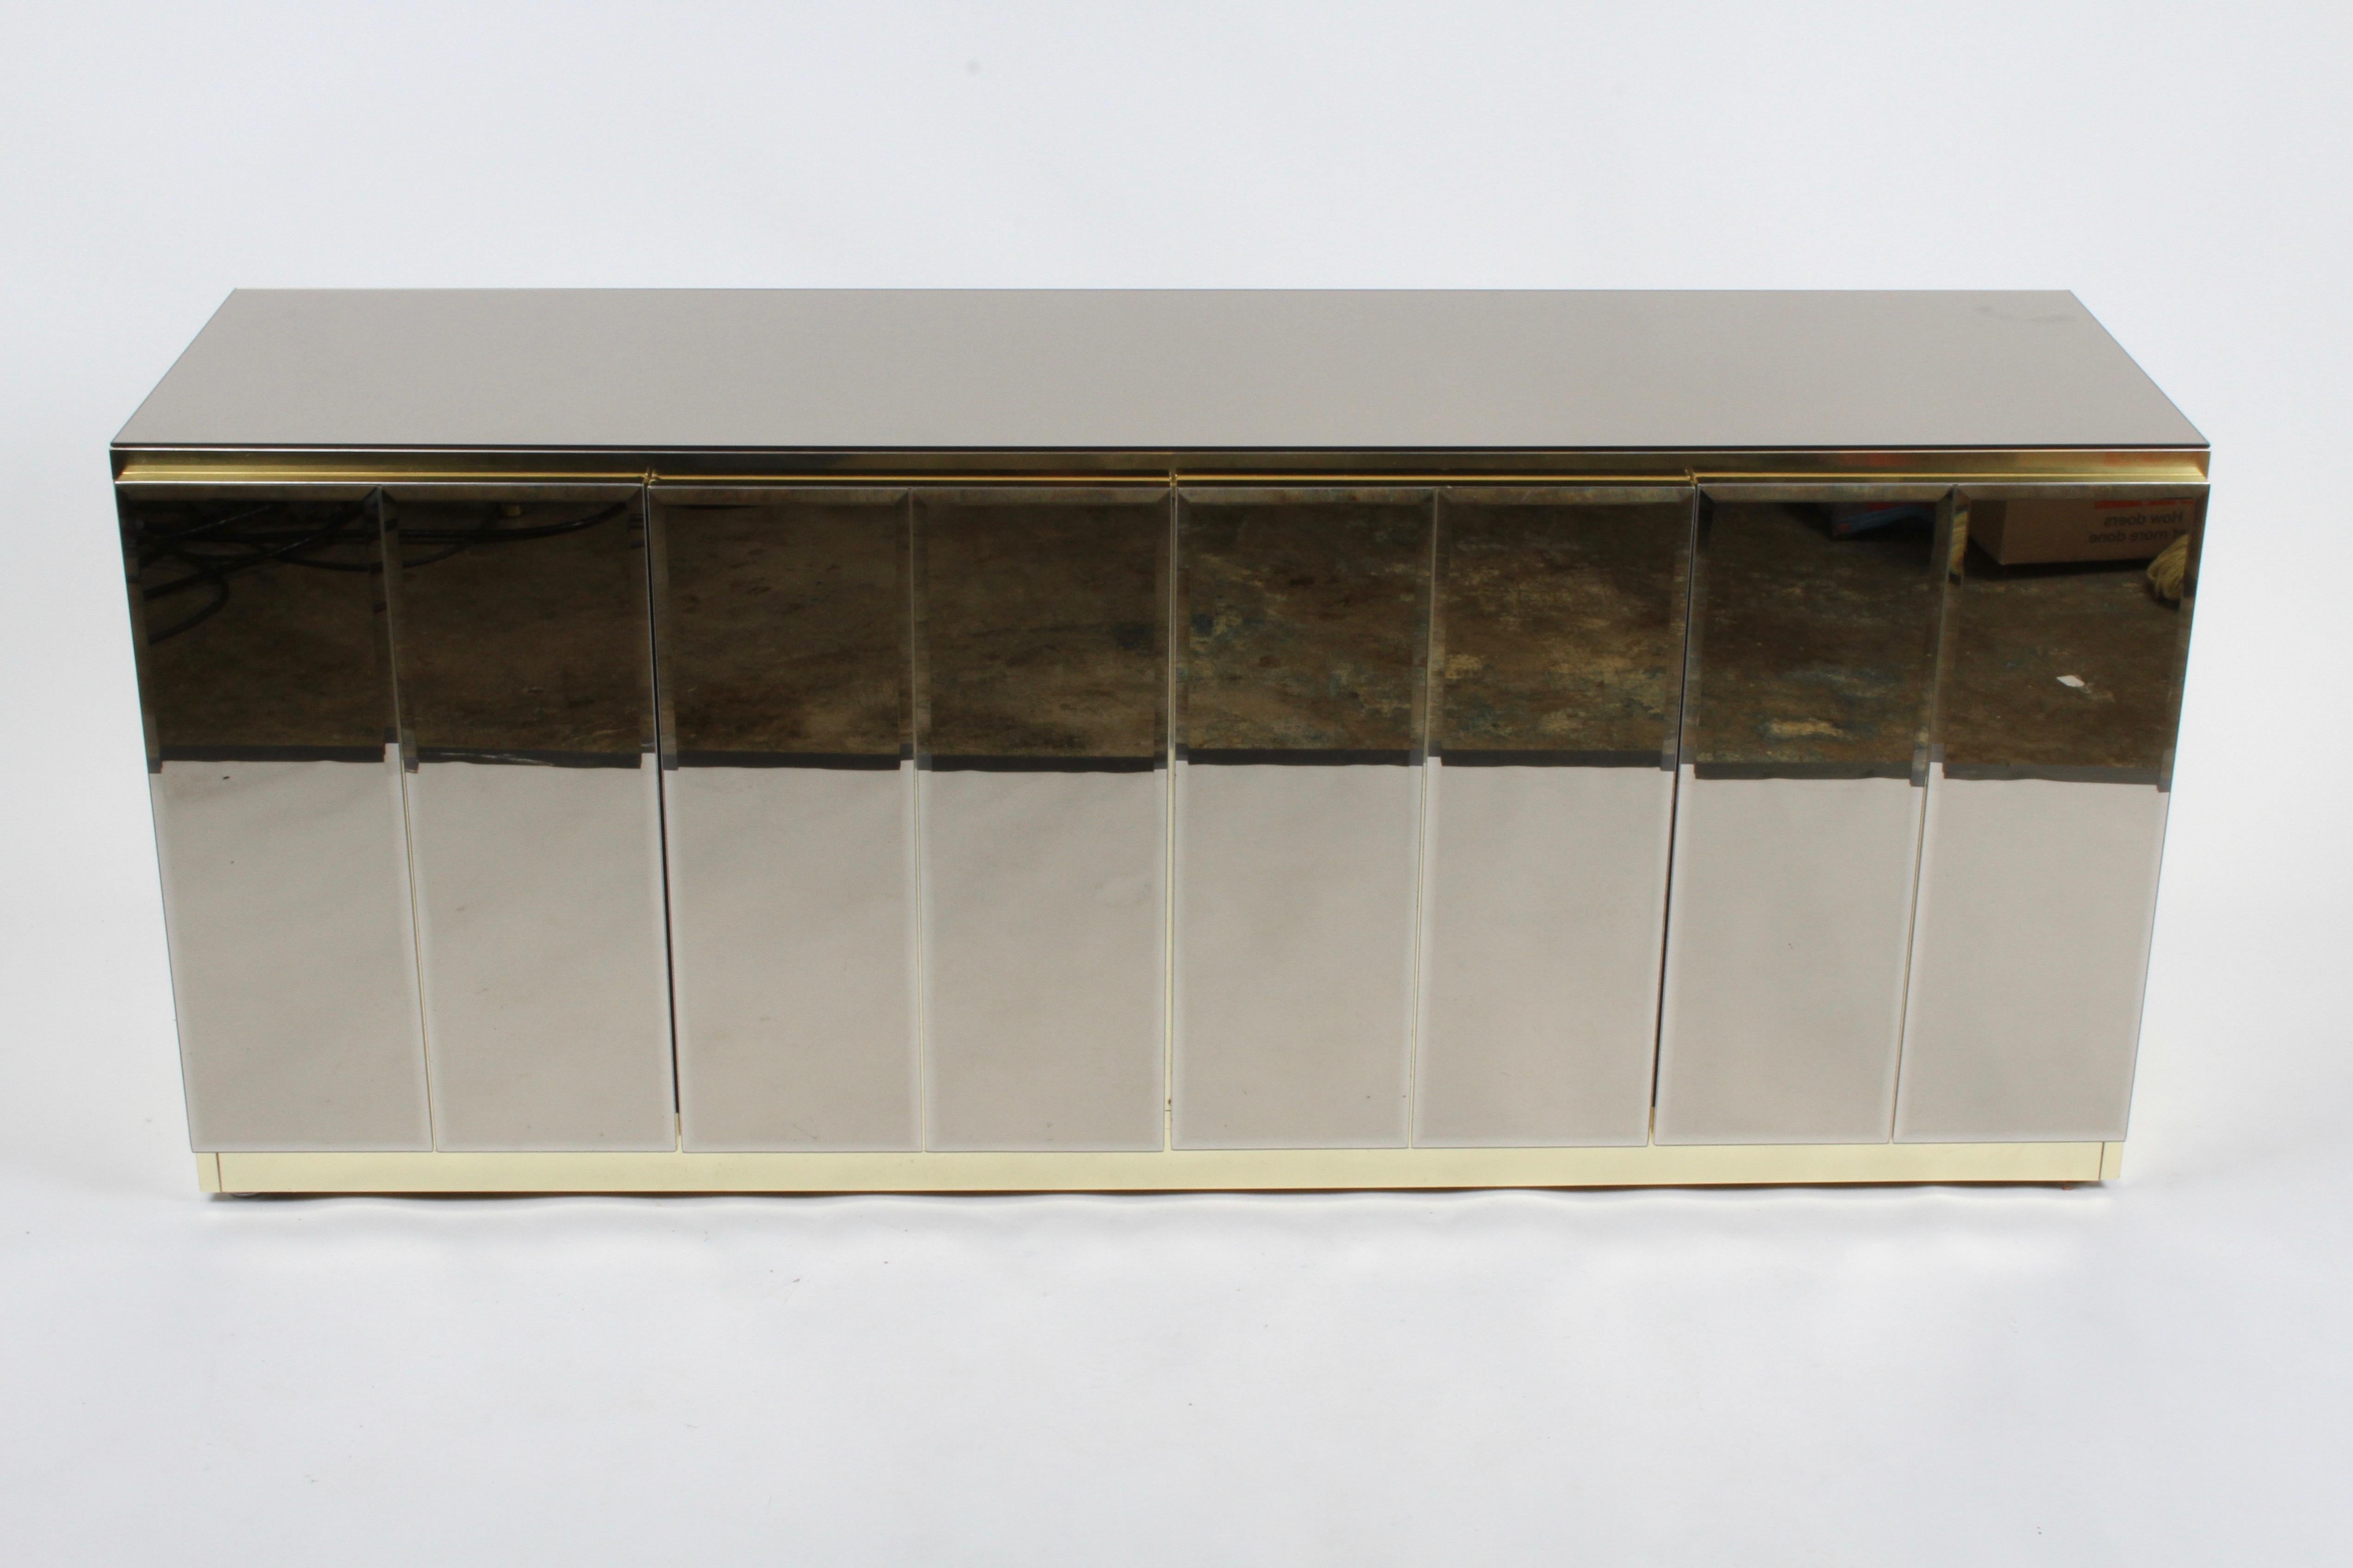 Fabulous Hollywood Regency signed Ello sideboard /buffet with bronze mirror top, bronze beveled glass doors and brass detailing. The interior having adjustable shelving and a single drawer. Shelves are 35